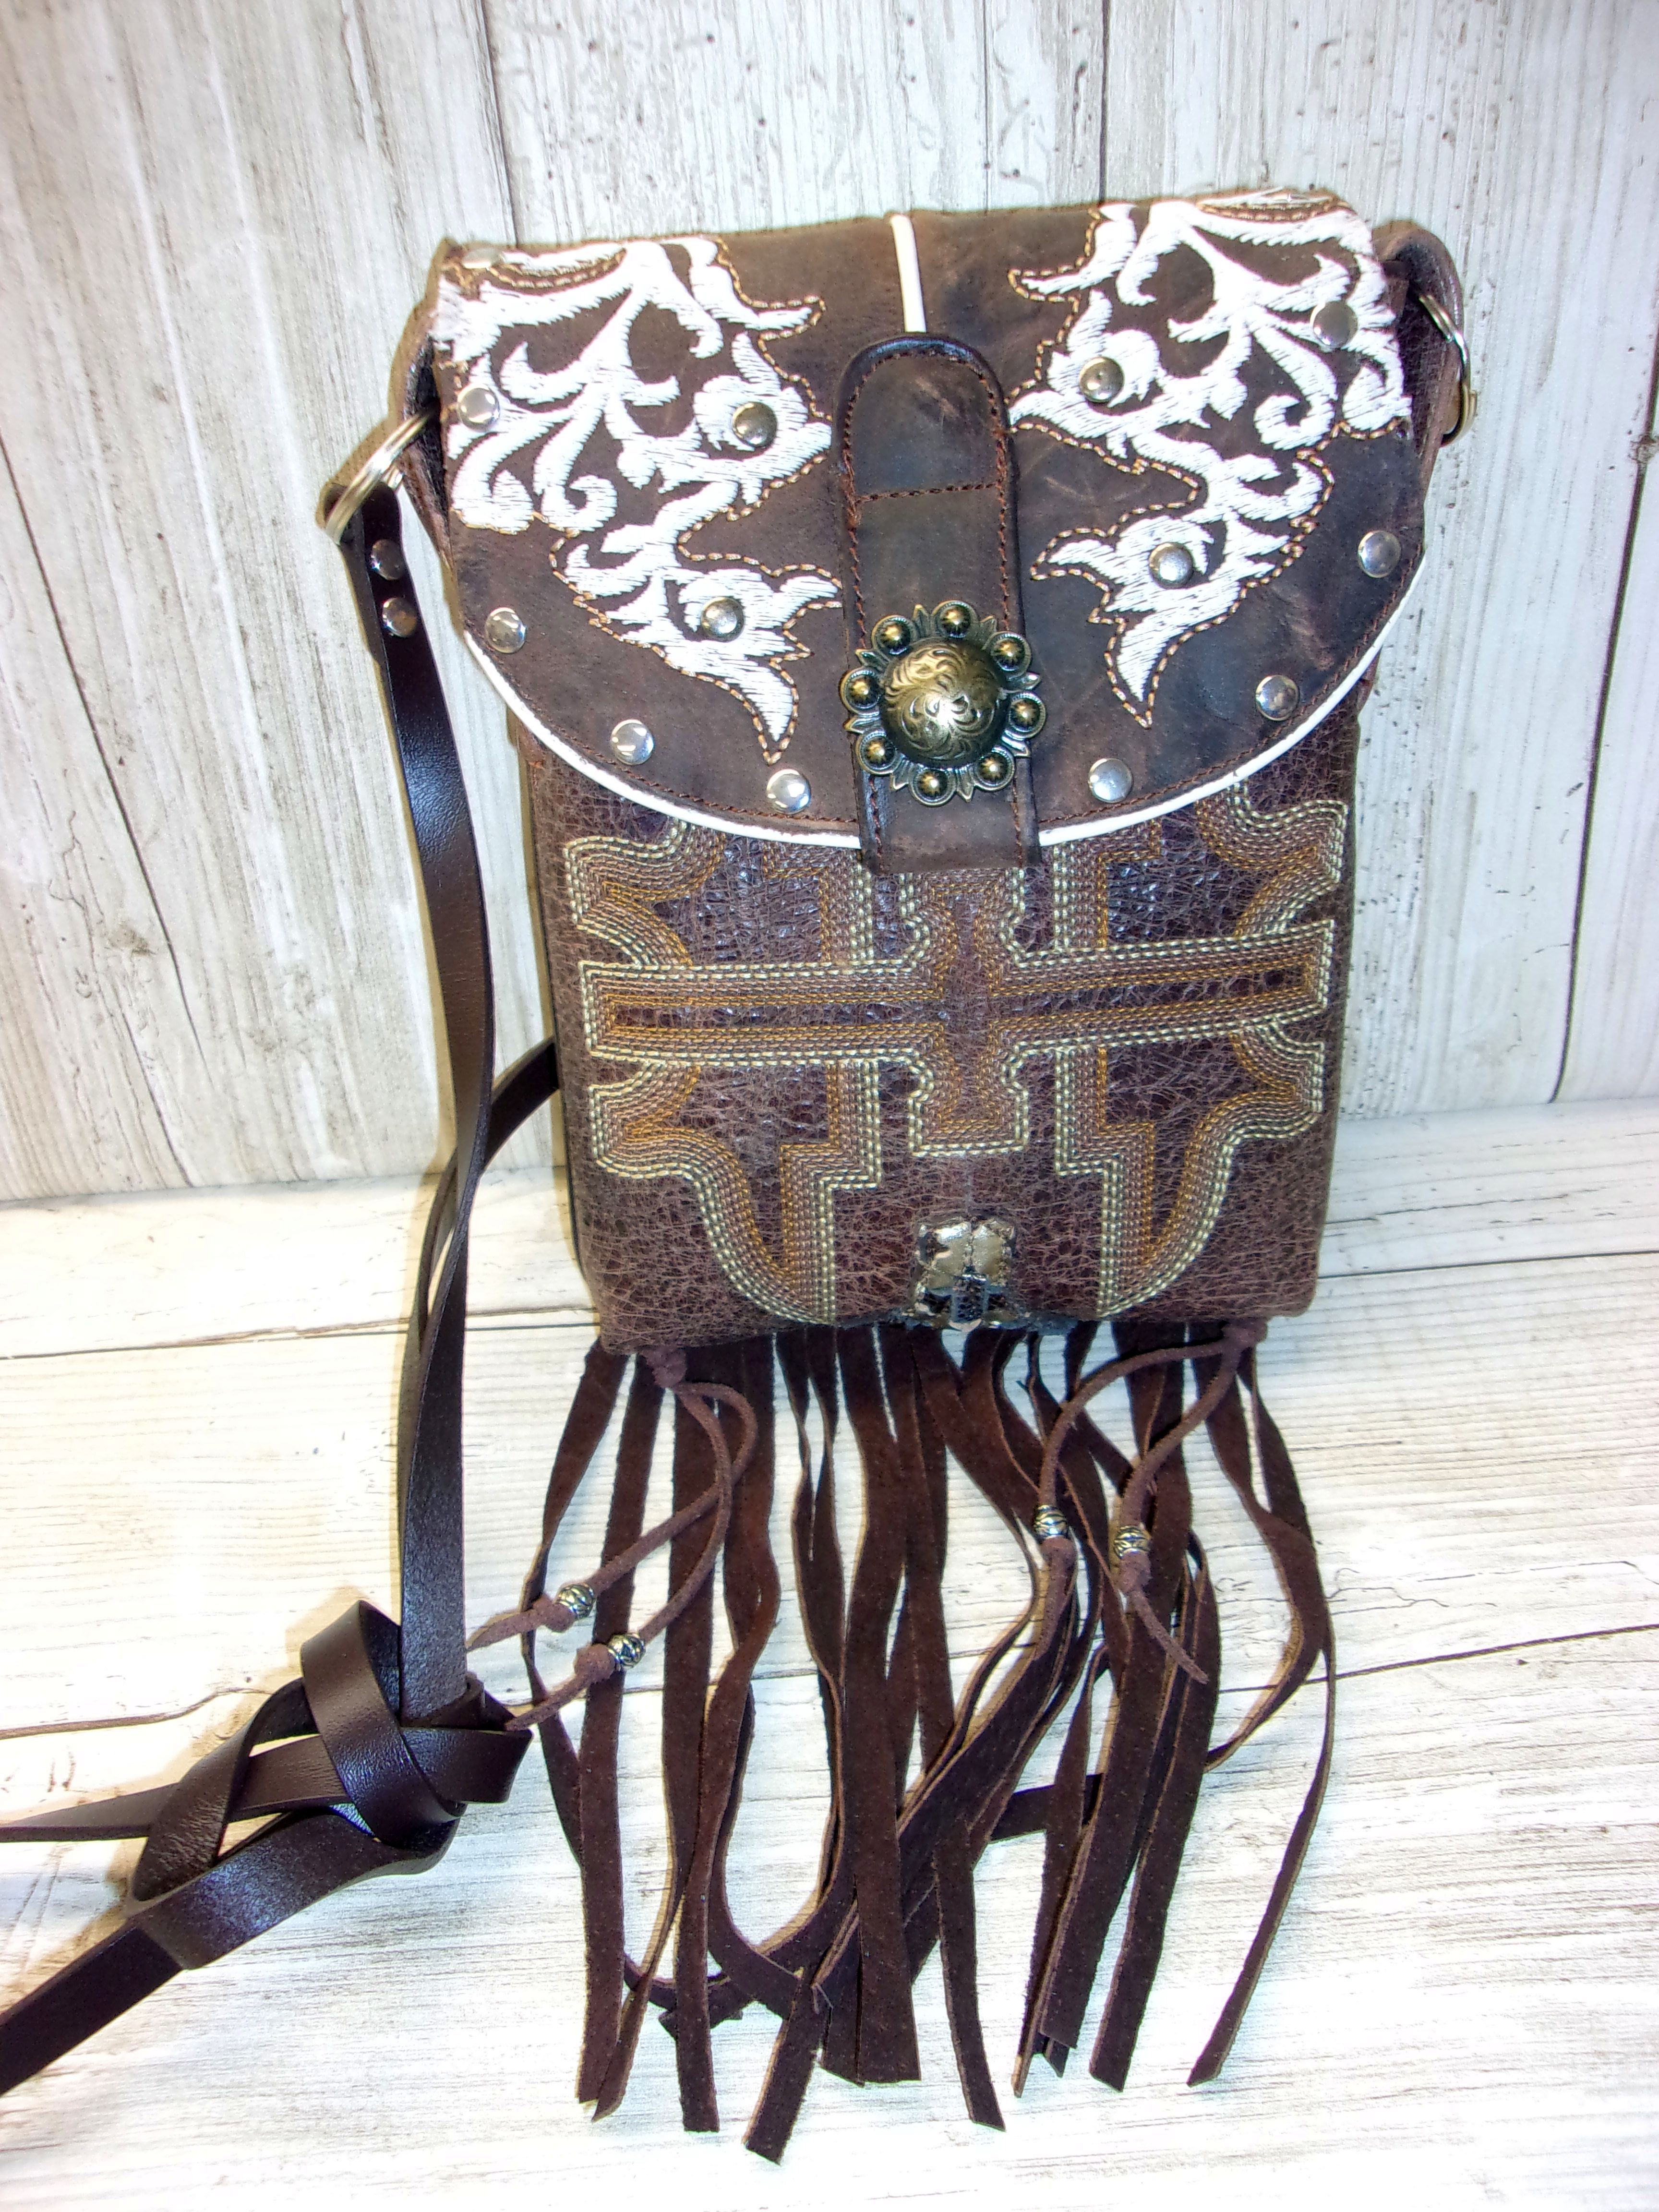 Small Cowboy Boot Purse with Fringe sm210 Chris Thompson Bags